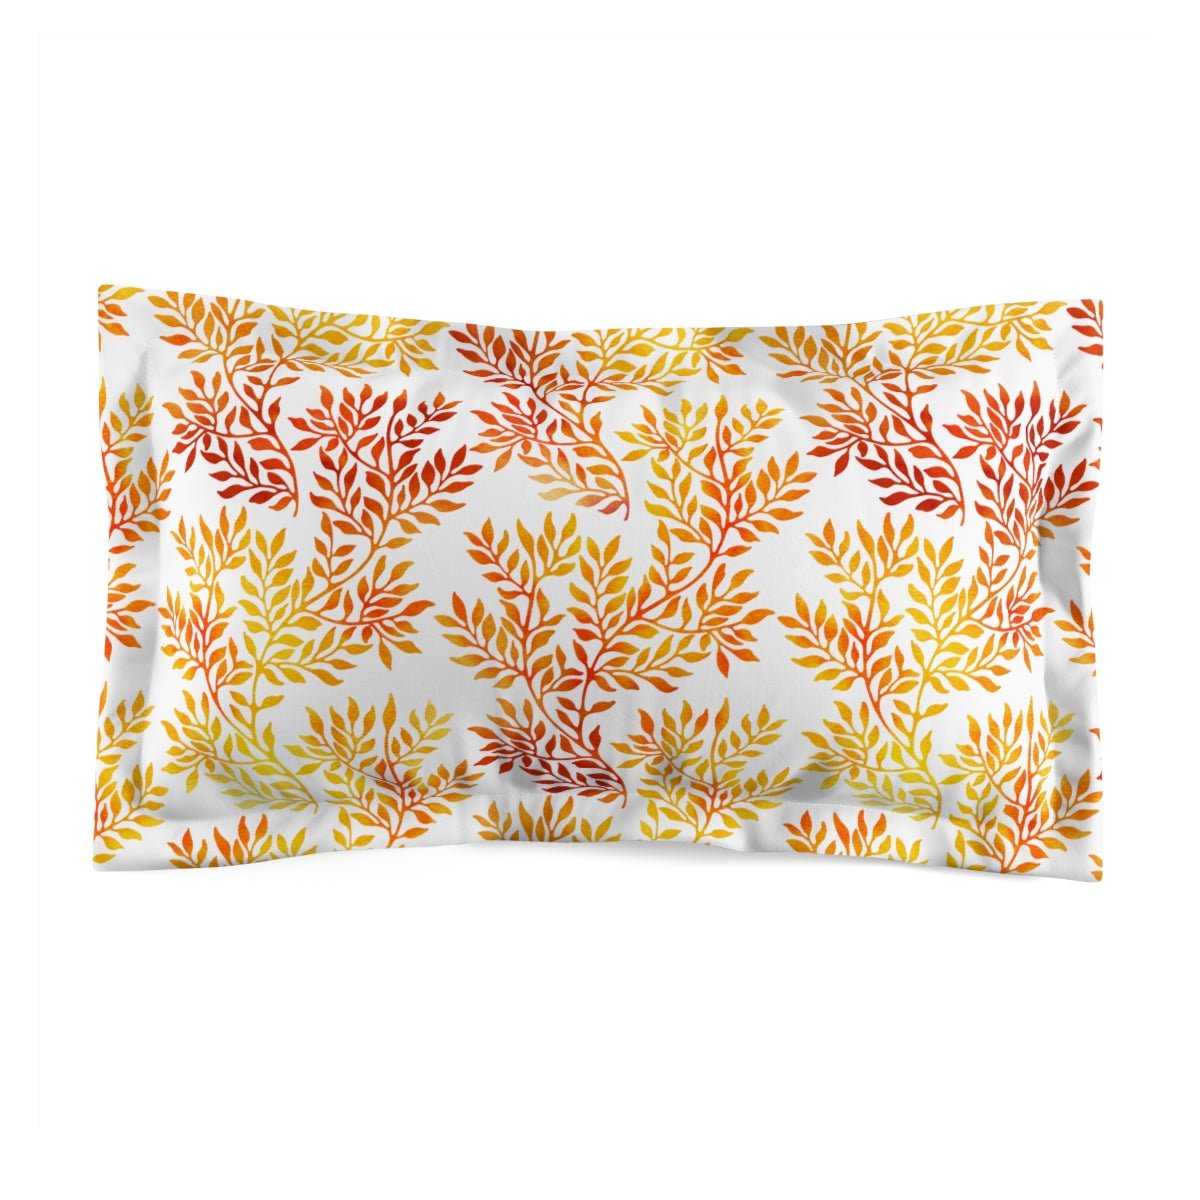 Fall Red and Orange Leaves Microfiber Pillow Sham - Puffin Lime